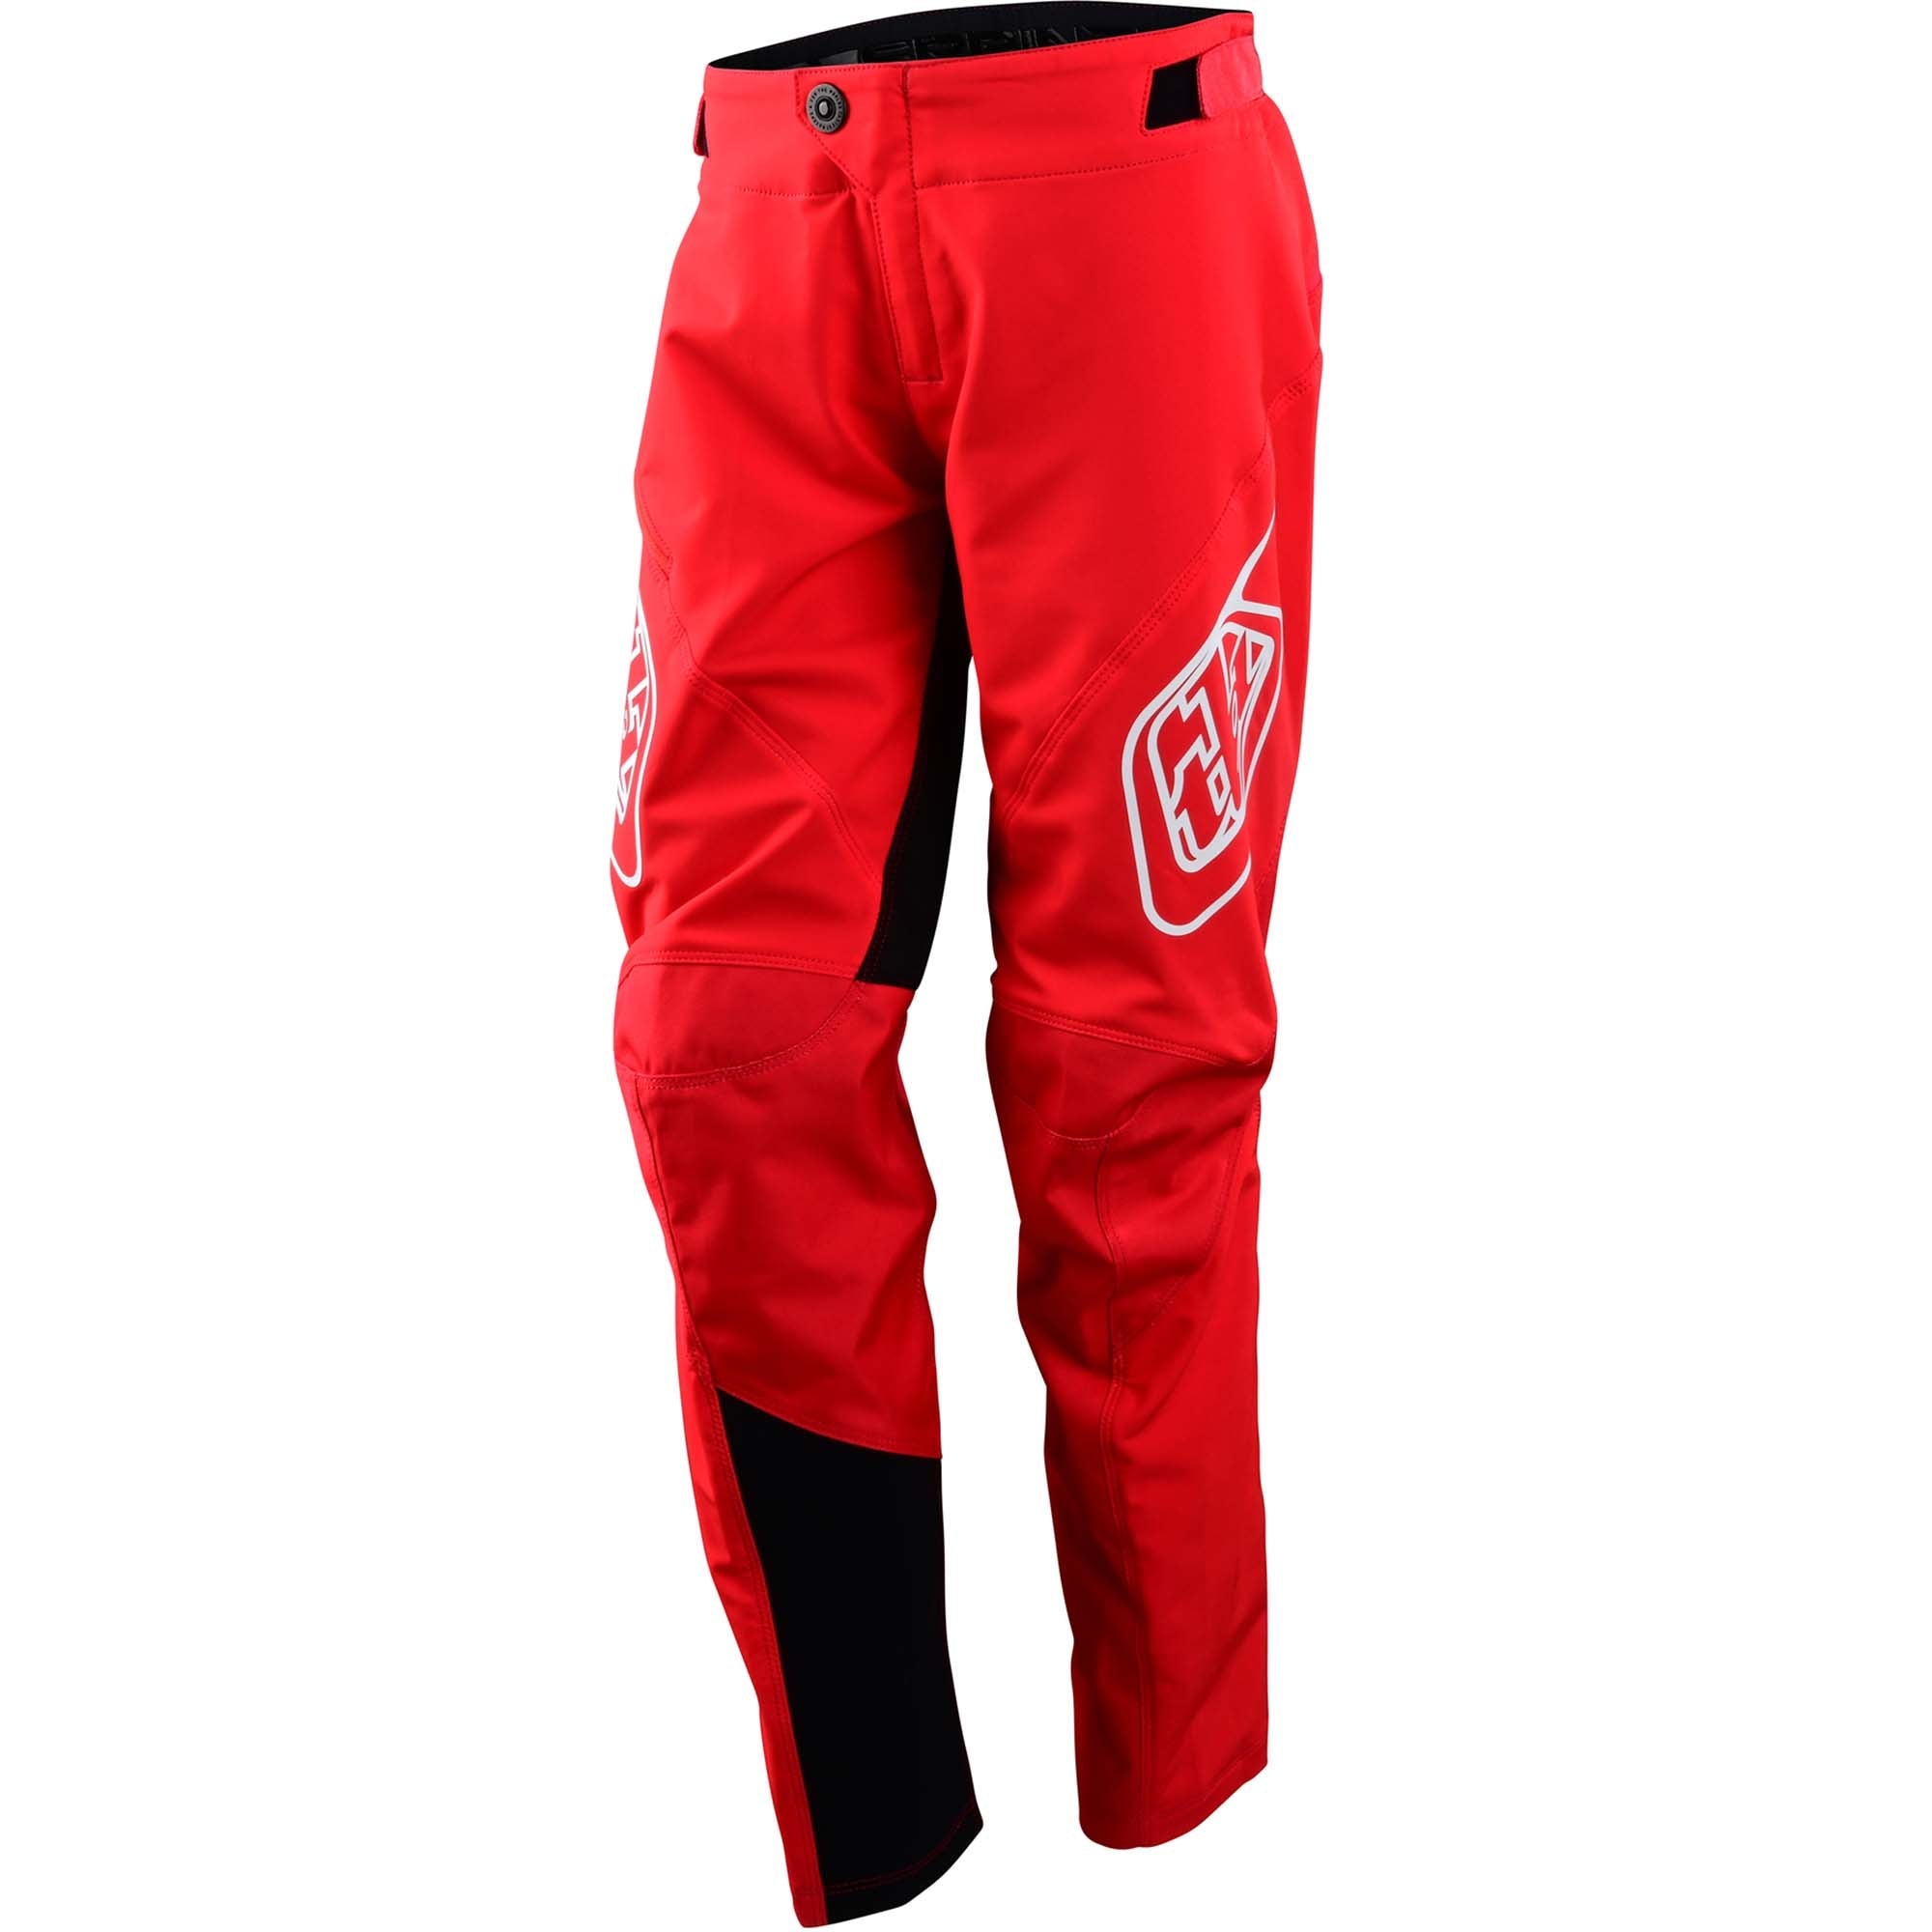 Troy Lee Designs Sprint Youth Pant